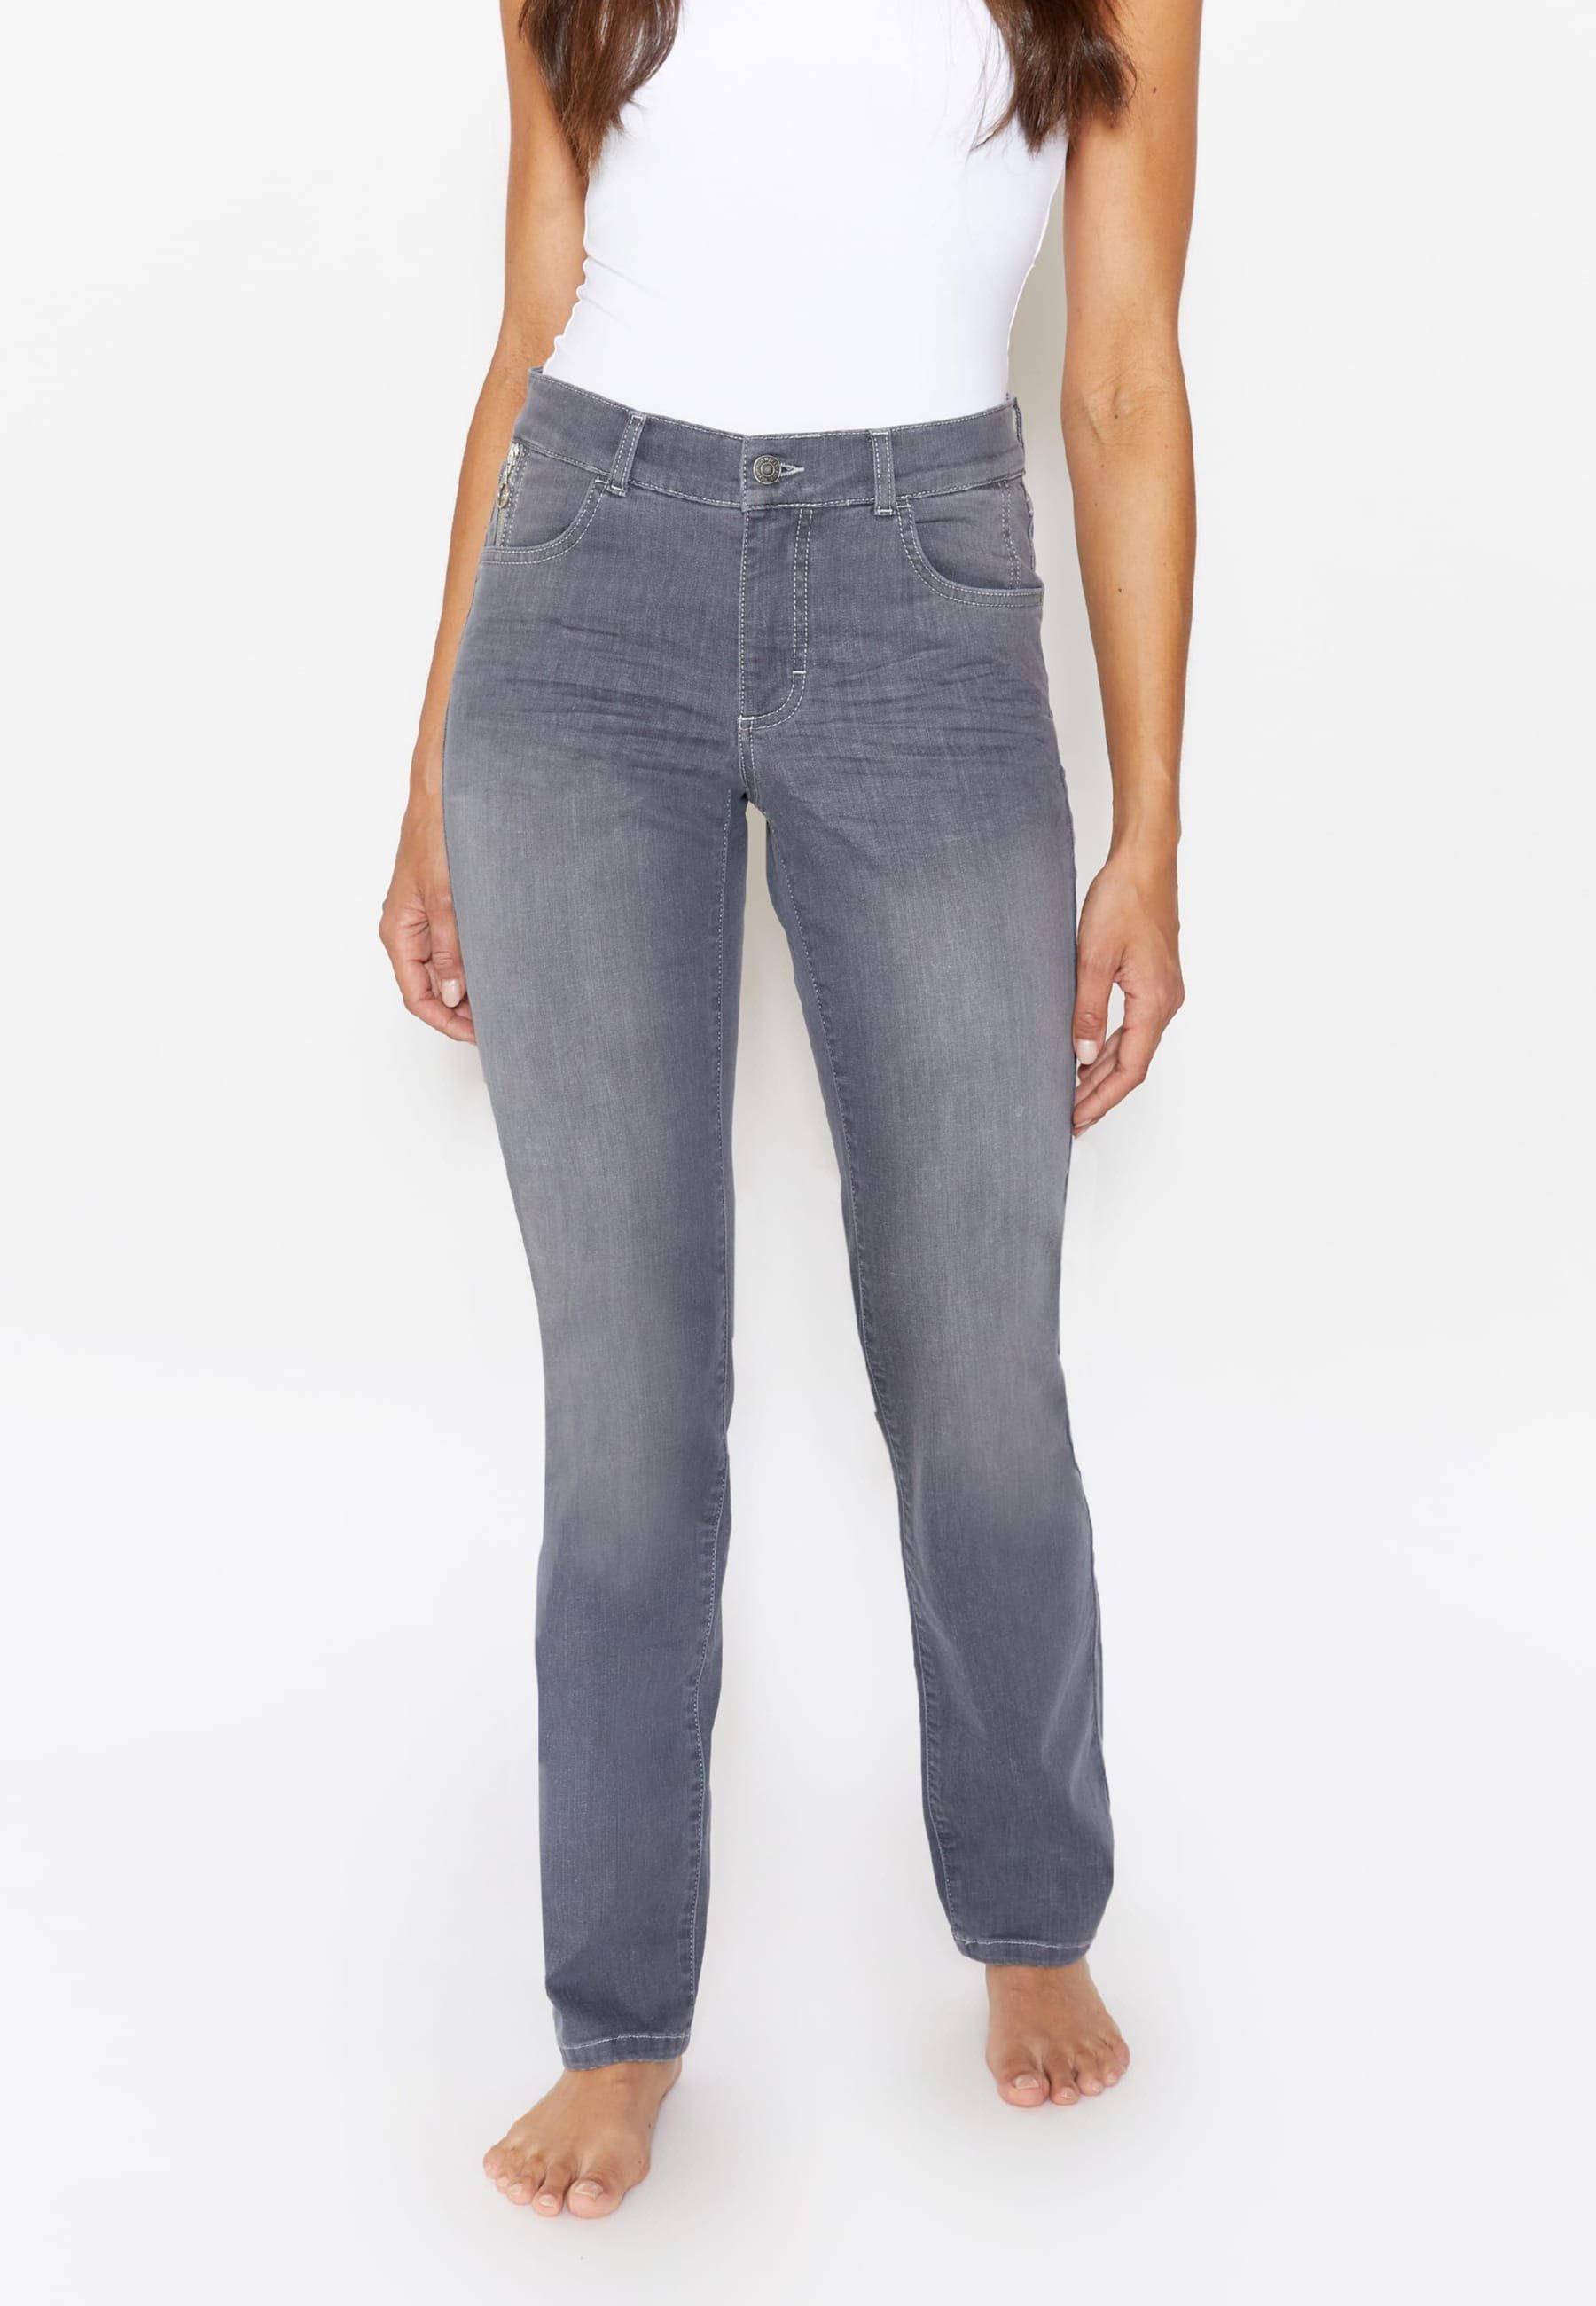 ANGELS Straight-Jeans 5-Pocket-Jeans Dolly grau 2.0